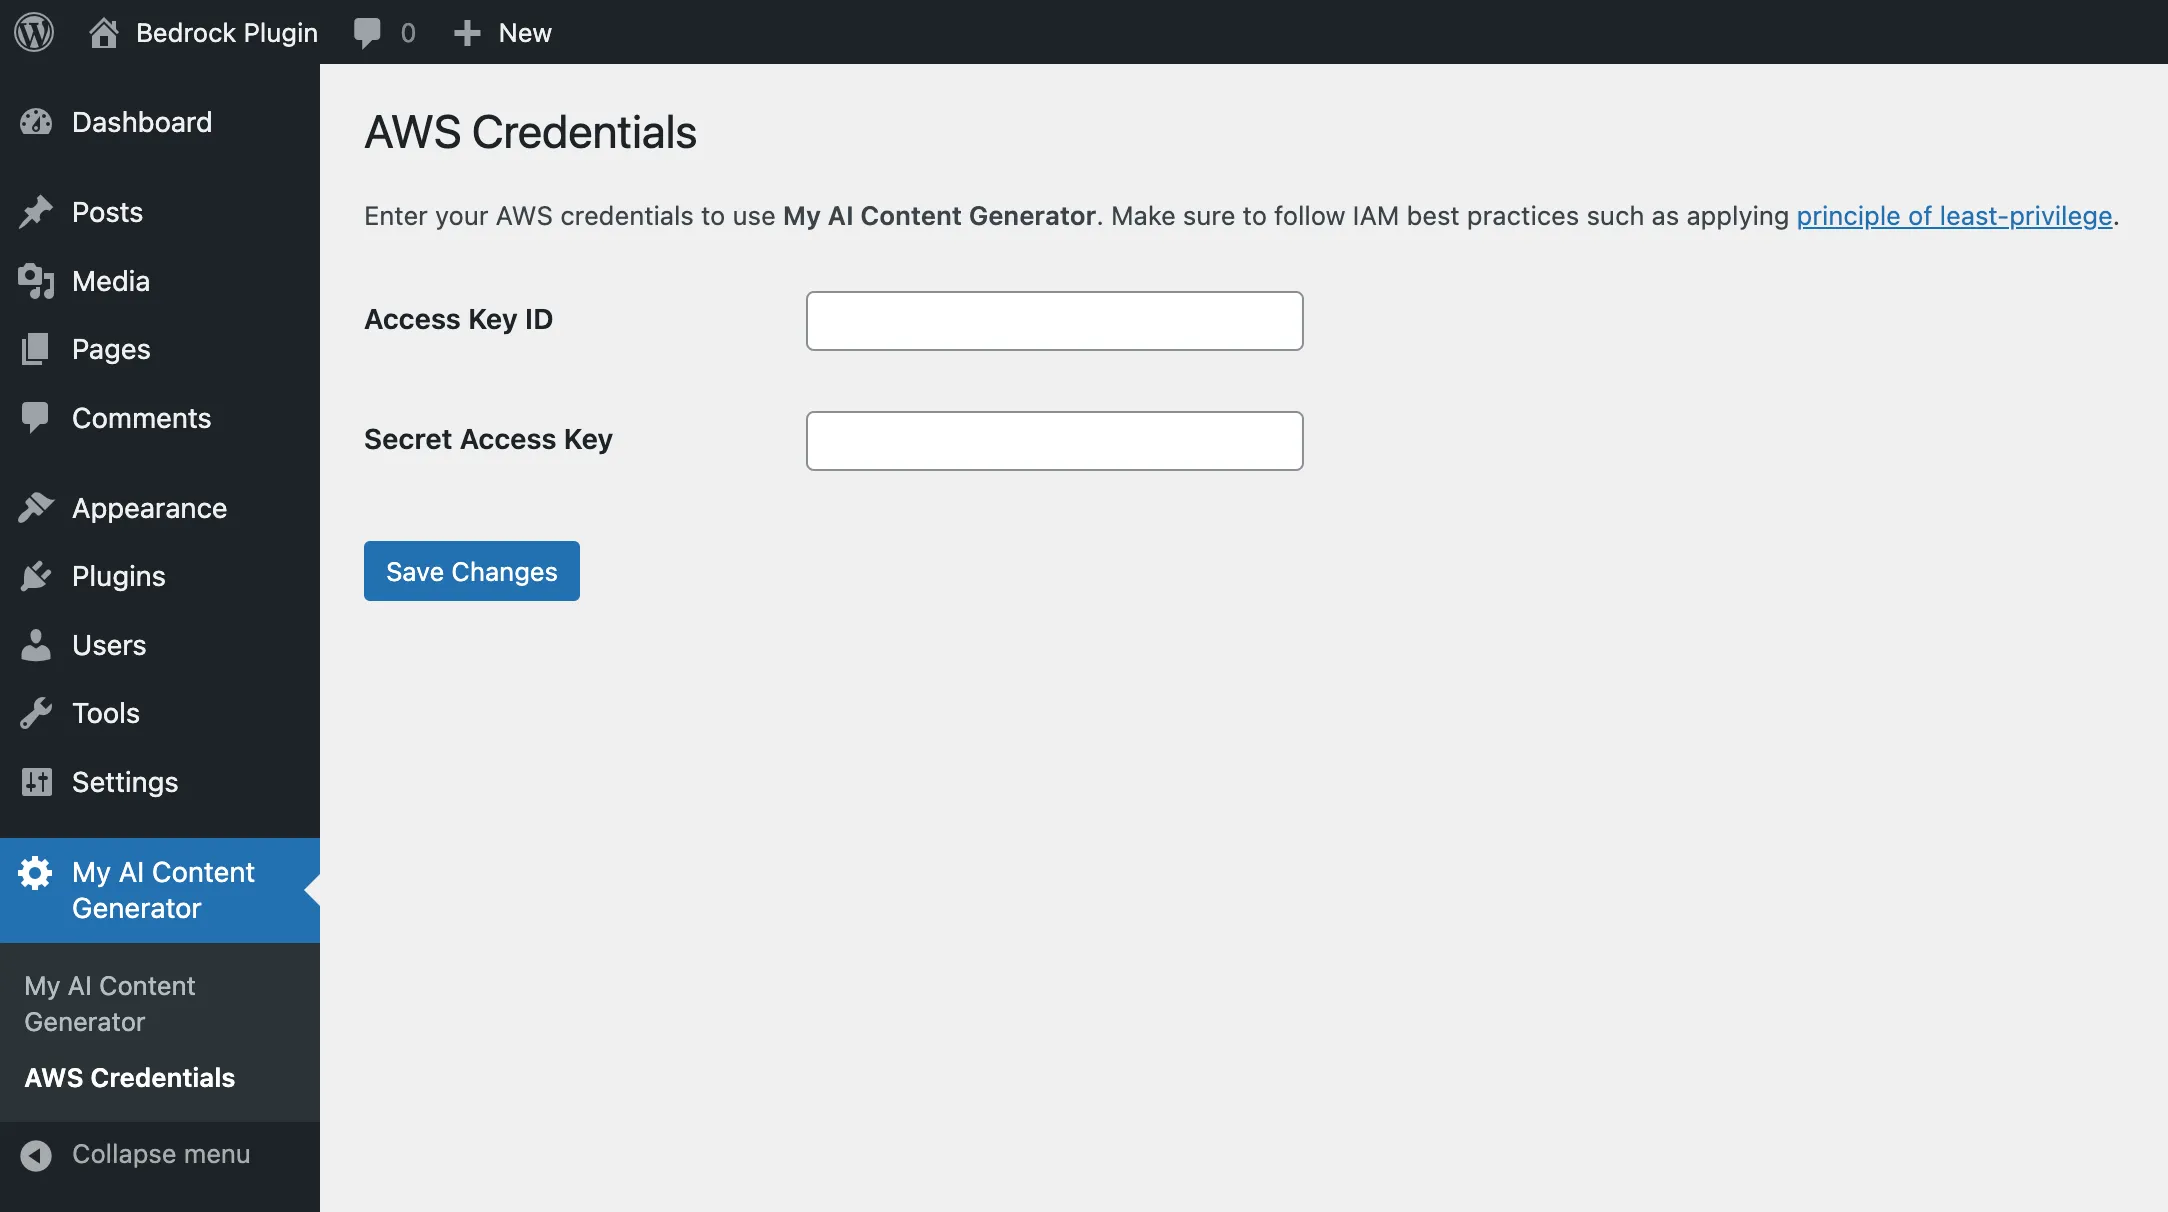 AWS Credentials page